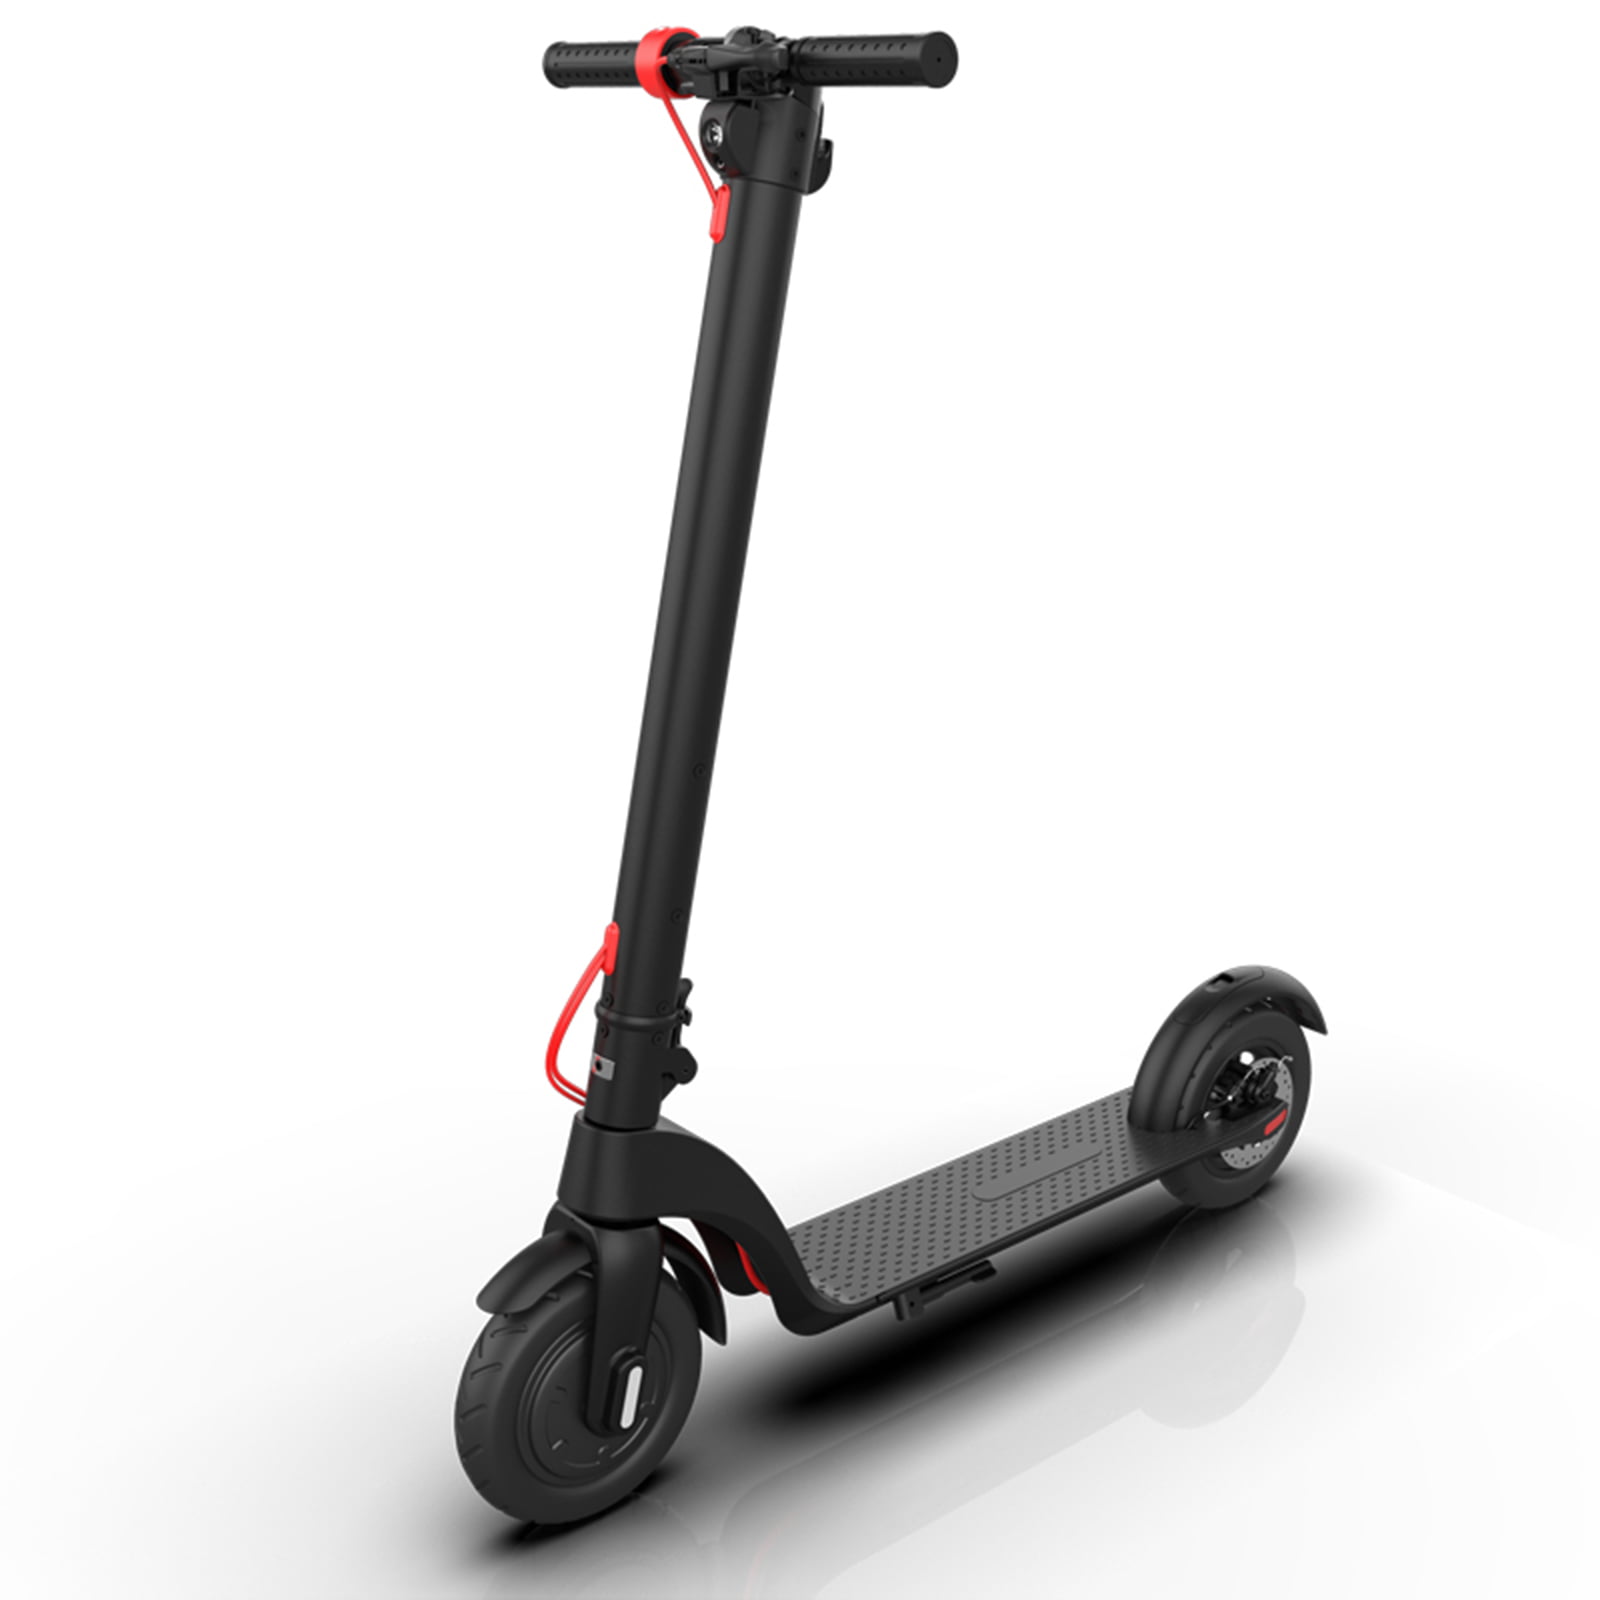 SAYTAY X7 Scooter - 10" Air Filled 350W & 15 Mile Range, Max 20MPH, Detachable Battery, Commuter Electric Scooter for Adults - Walmart.com